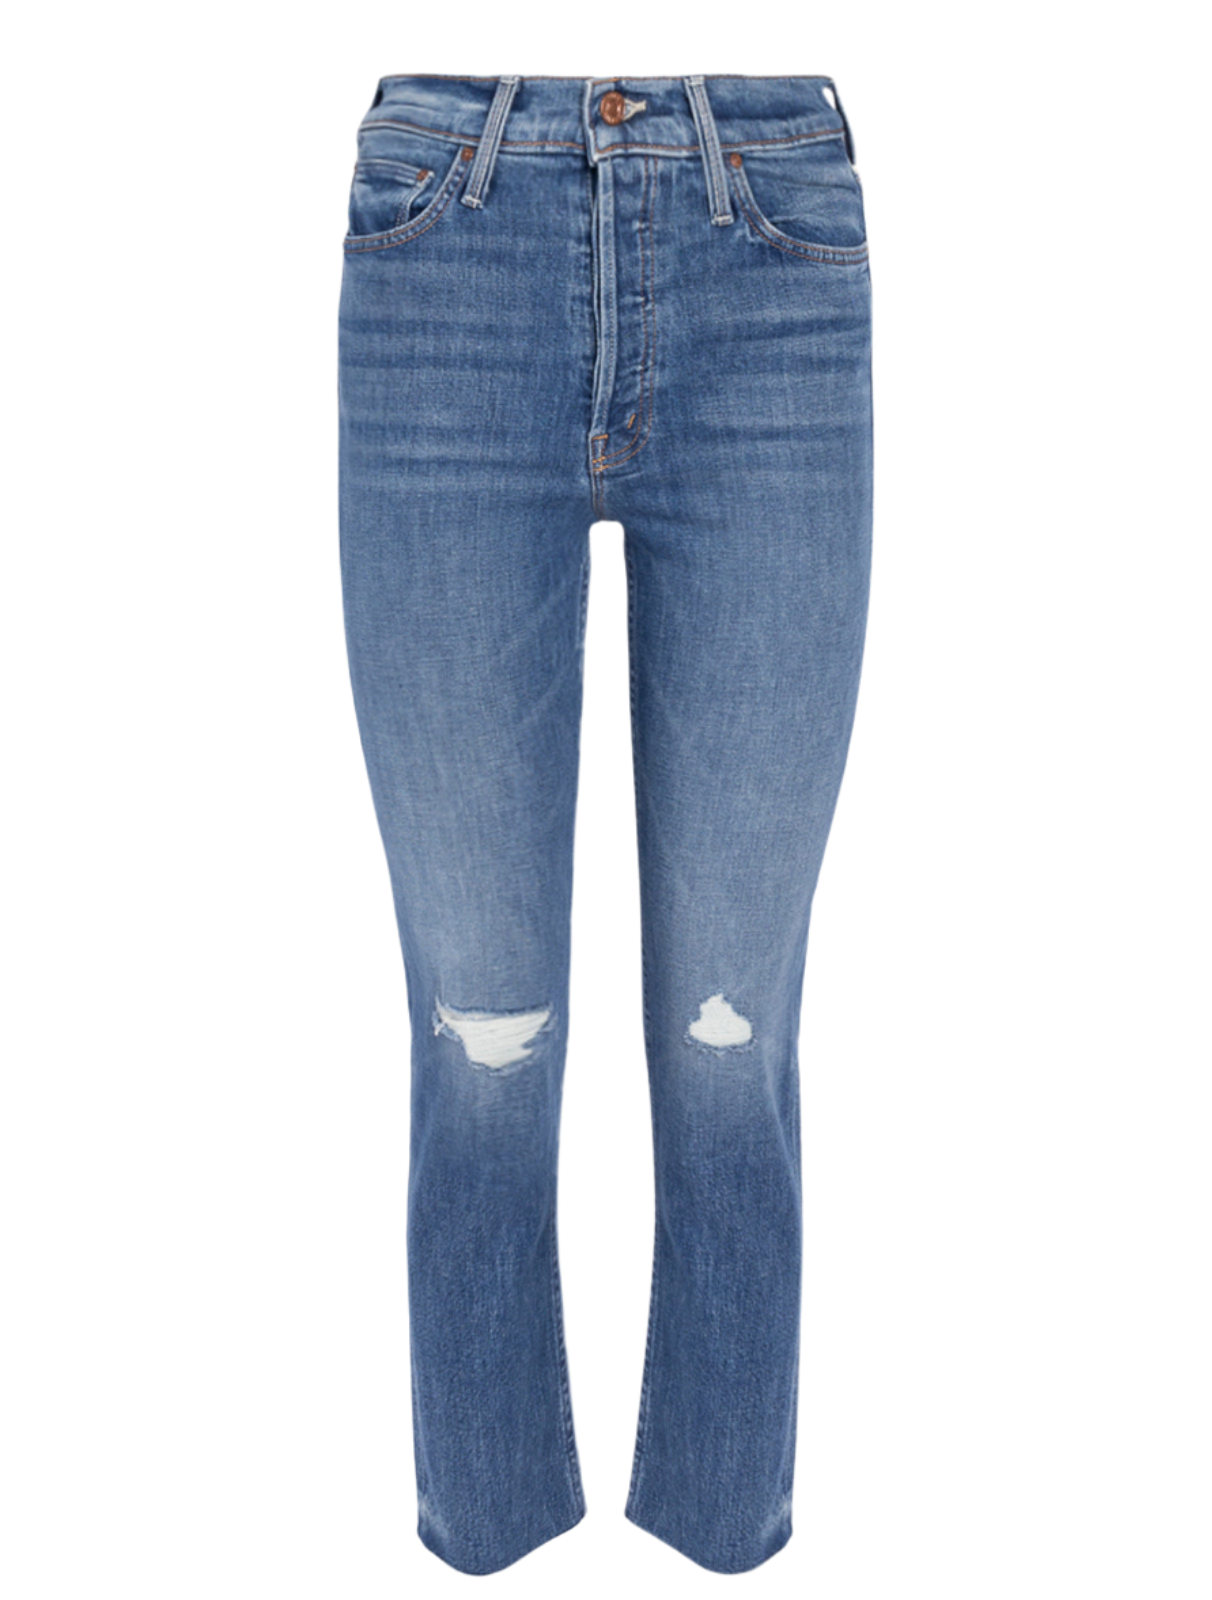 The Tomcat Ankle Fray Jeans